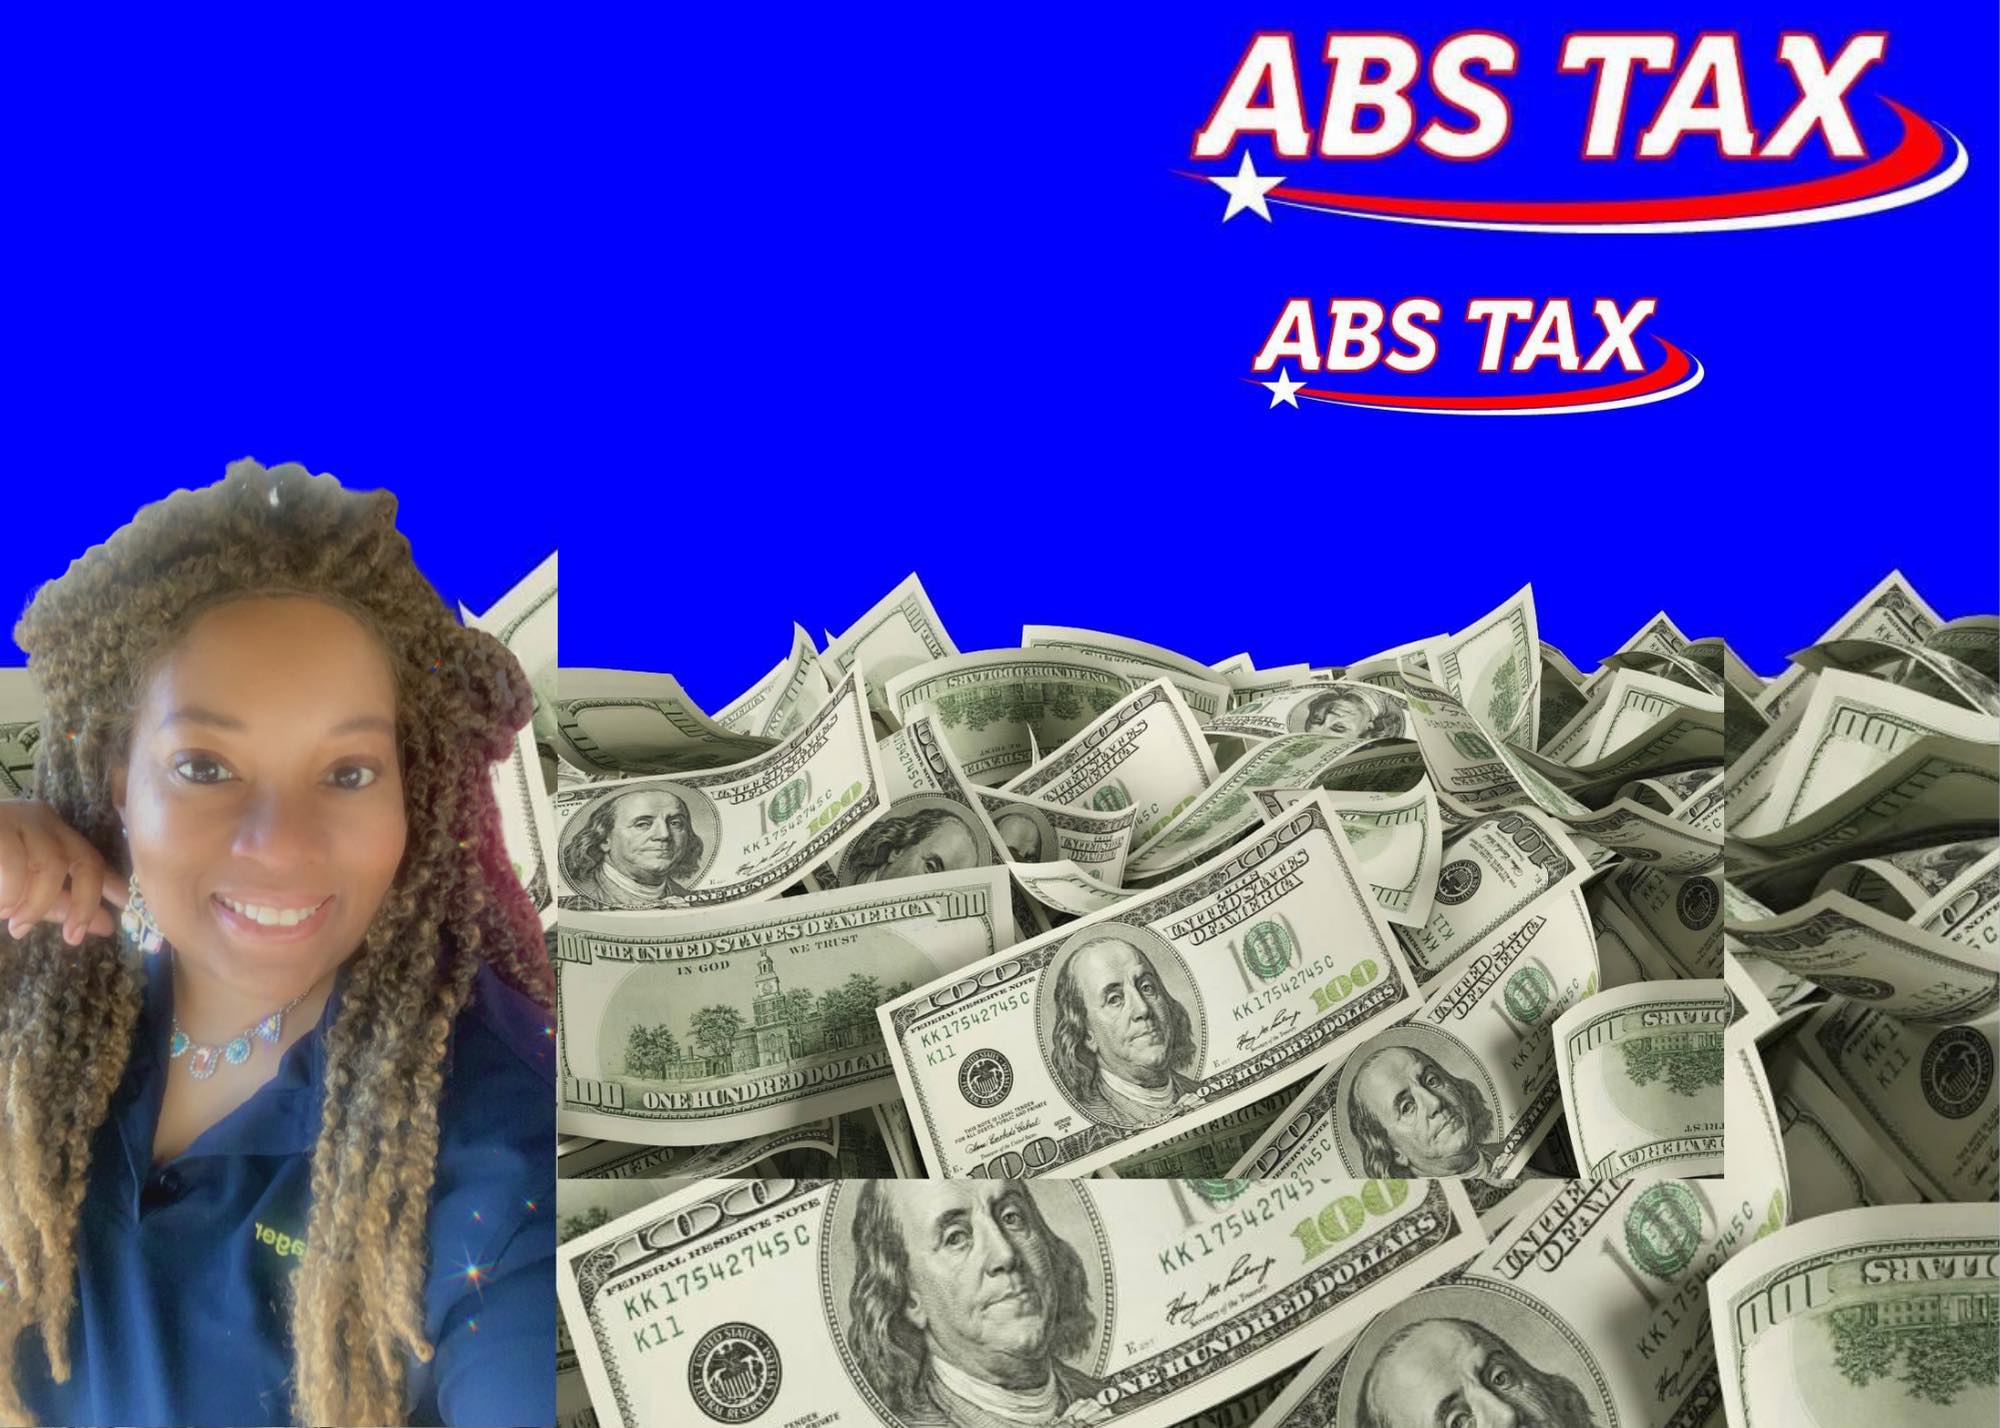 ABS Tax 103 N Davis Ave, Cleveland Mississippi 38732